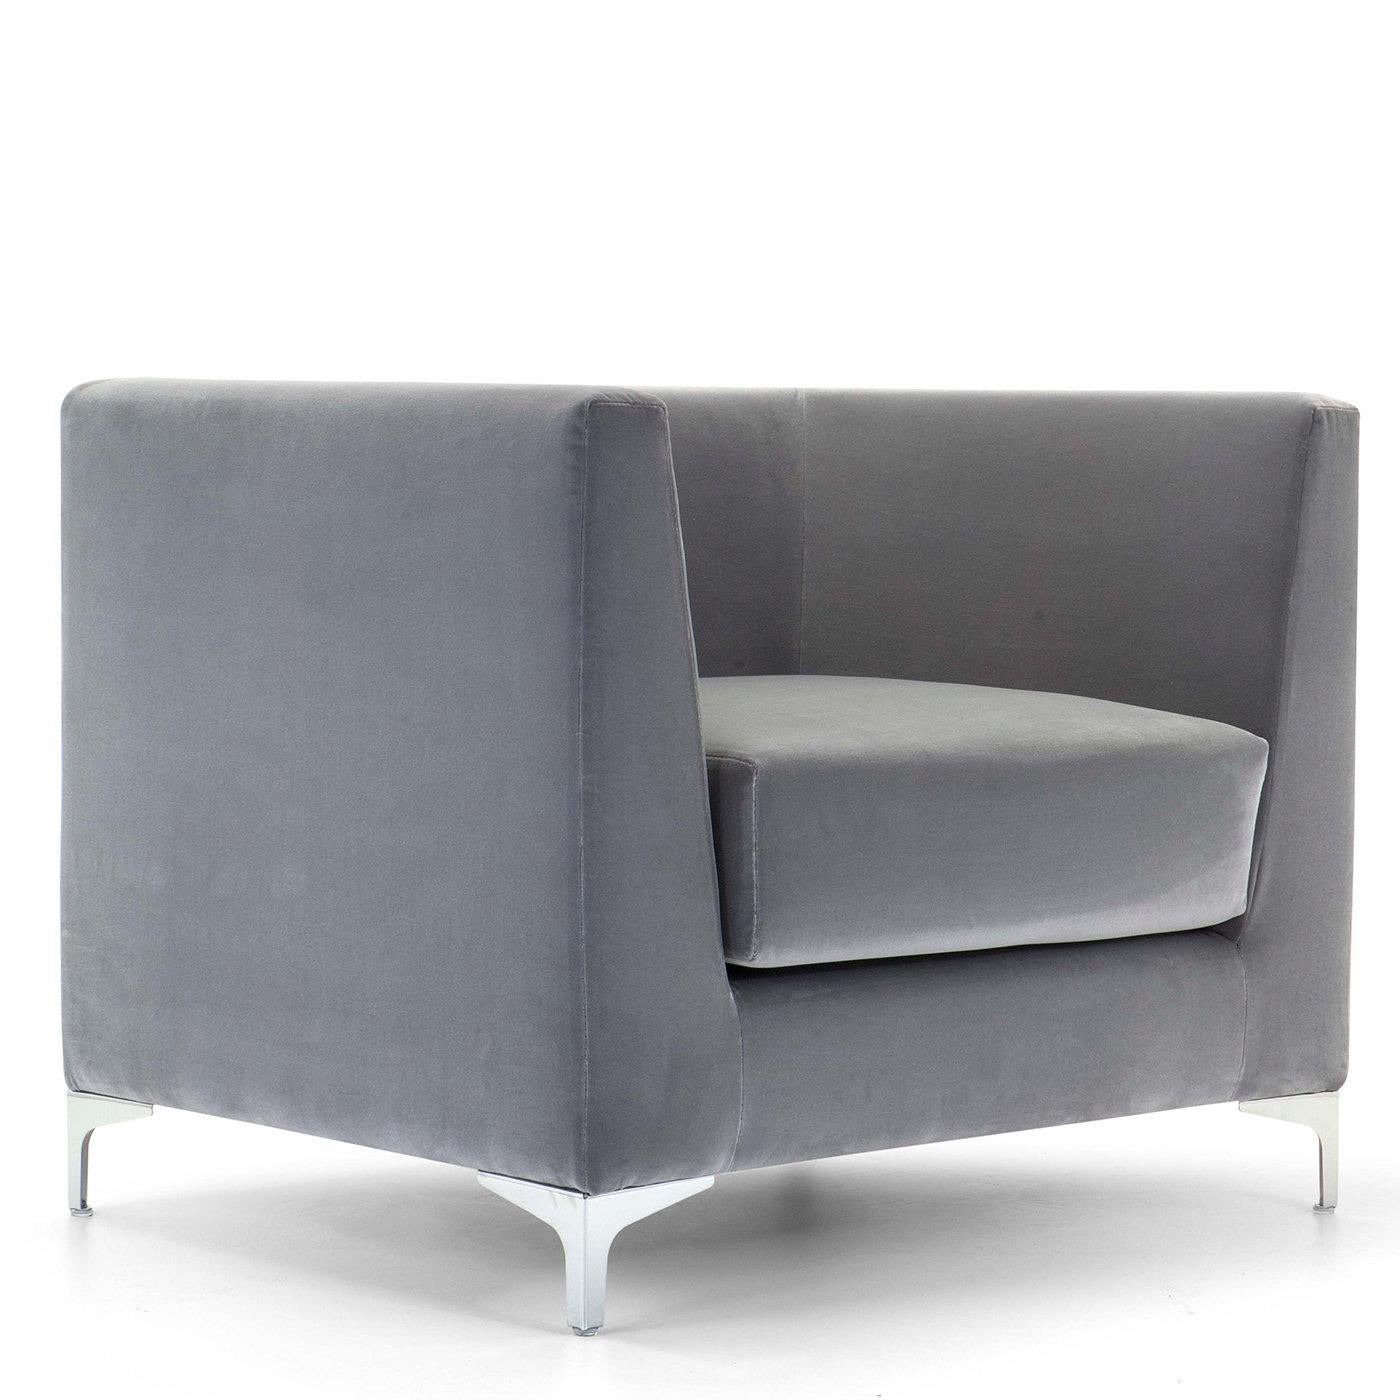 This iconic mid-century design has been updated with precise proportion and a seamless and clean appearance. Masterfully crafted and tailored, this armchair's structured silhouette is generously padded with multi-density polyurethane and covered in